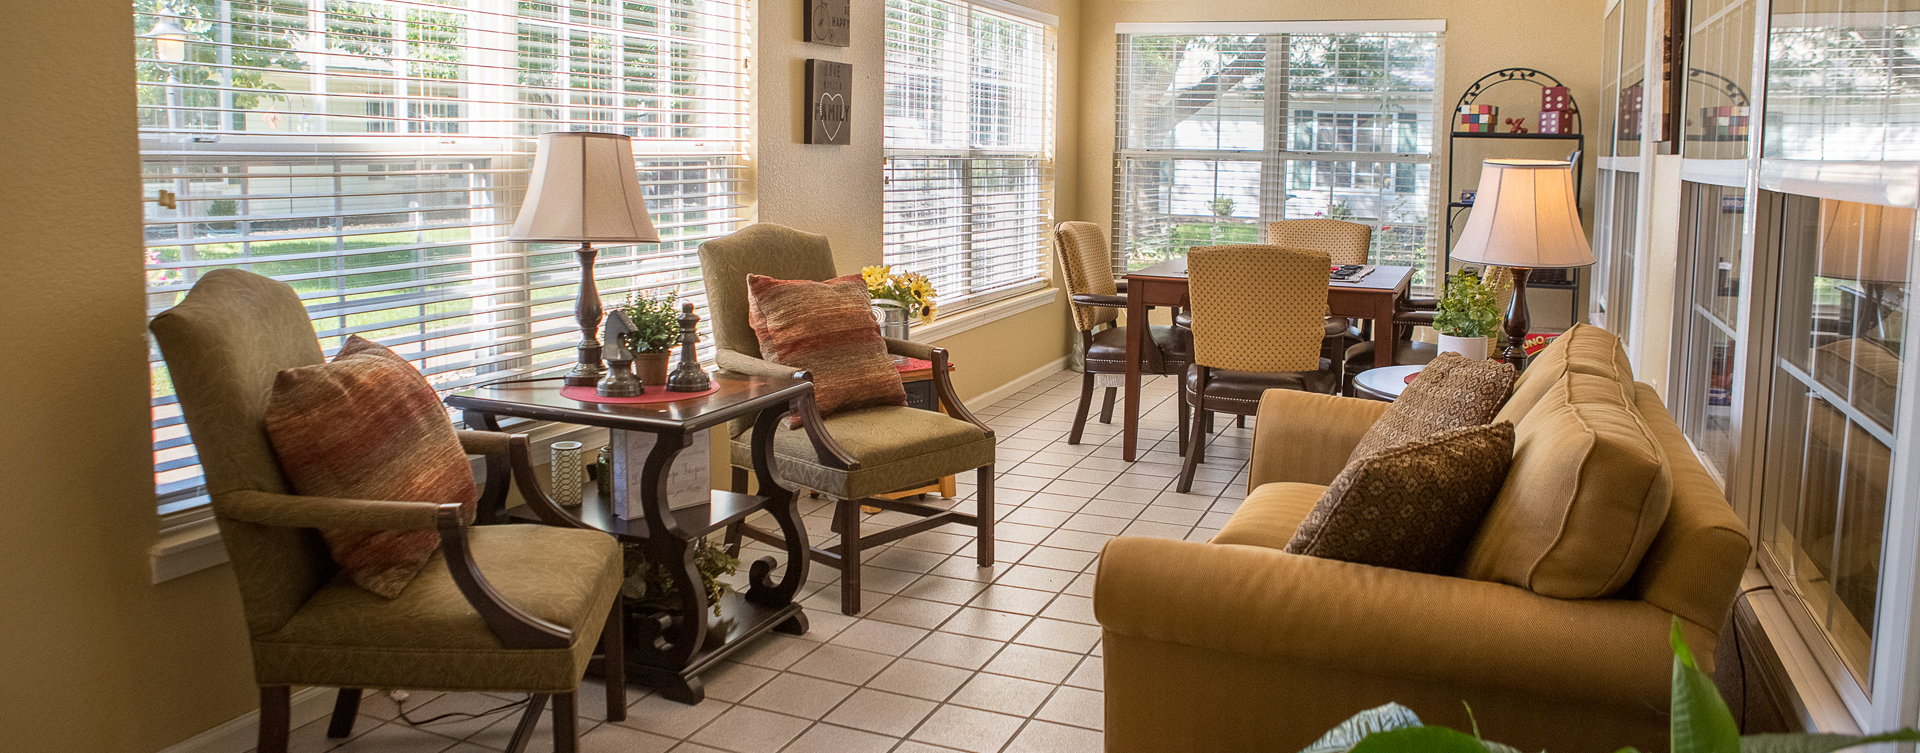 Relax in the warmth of the sunroom at Bickford of Muscatine